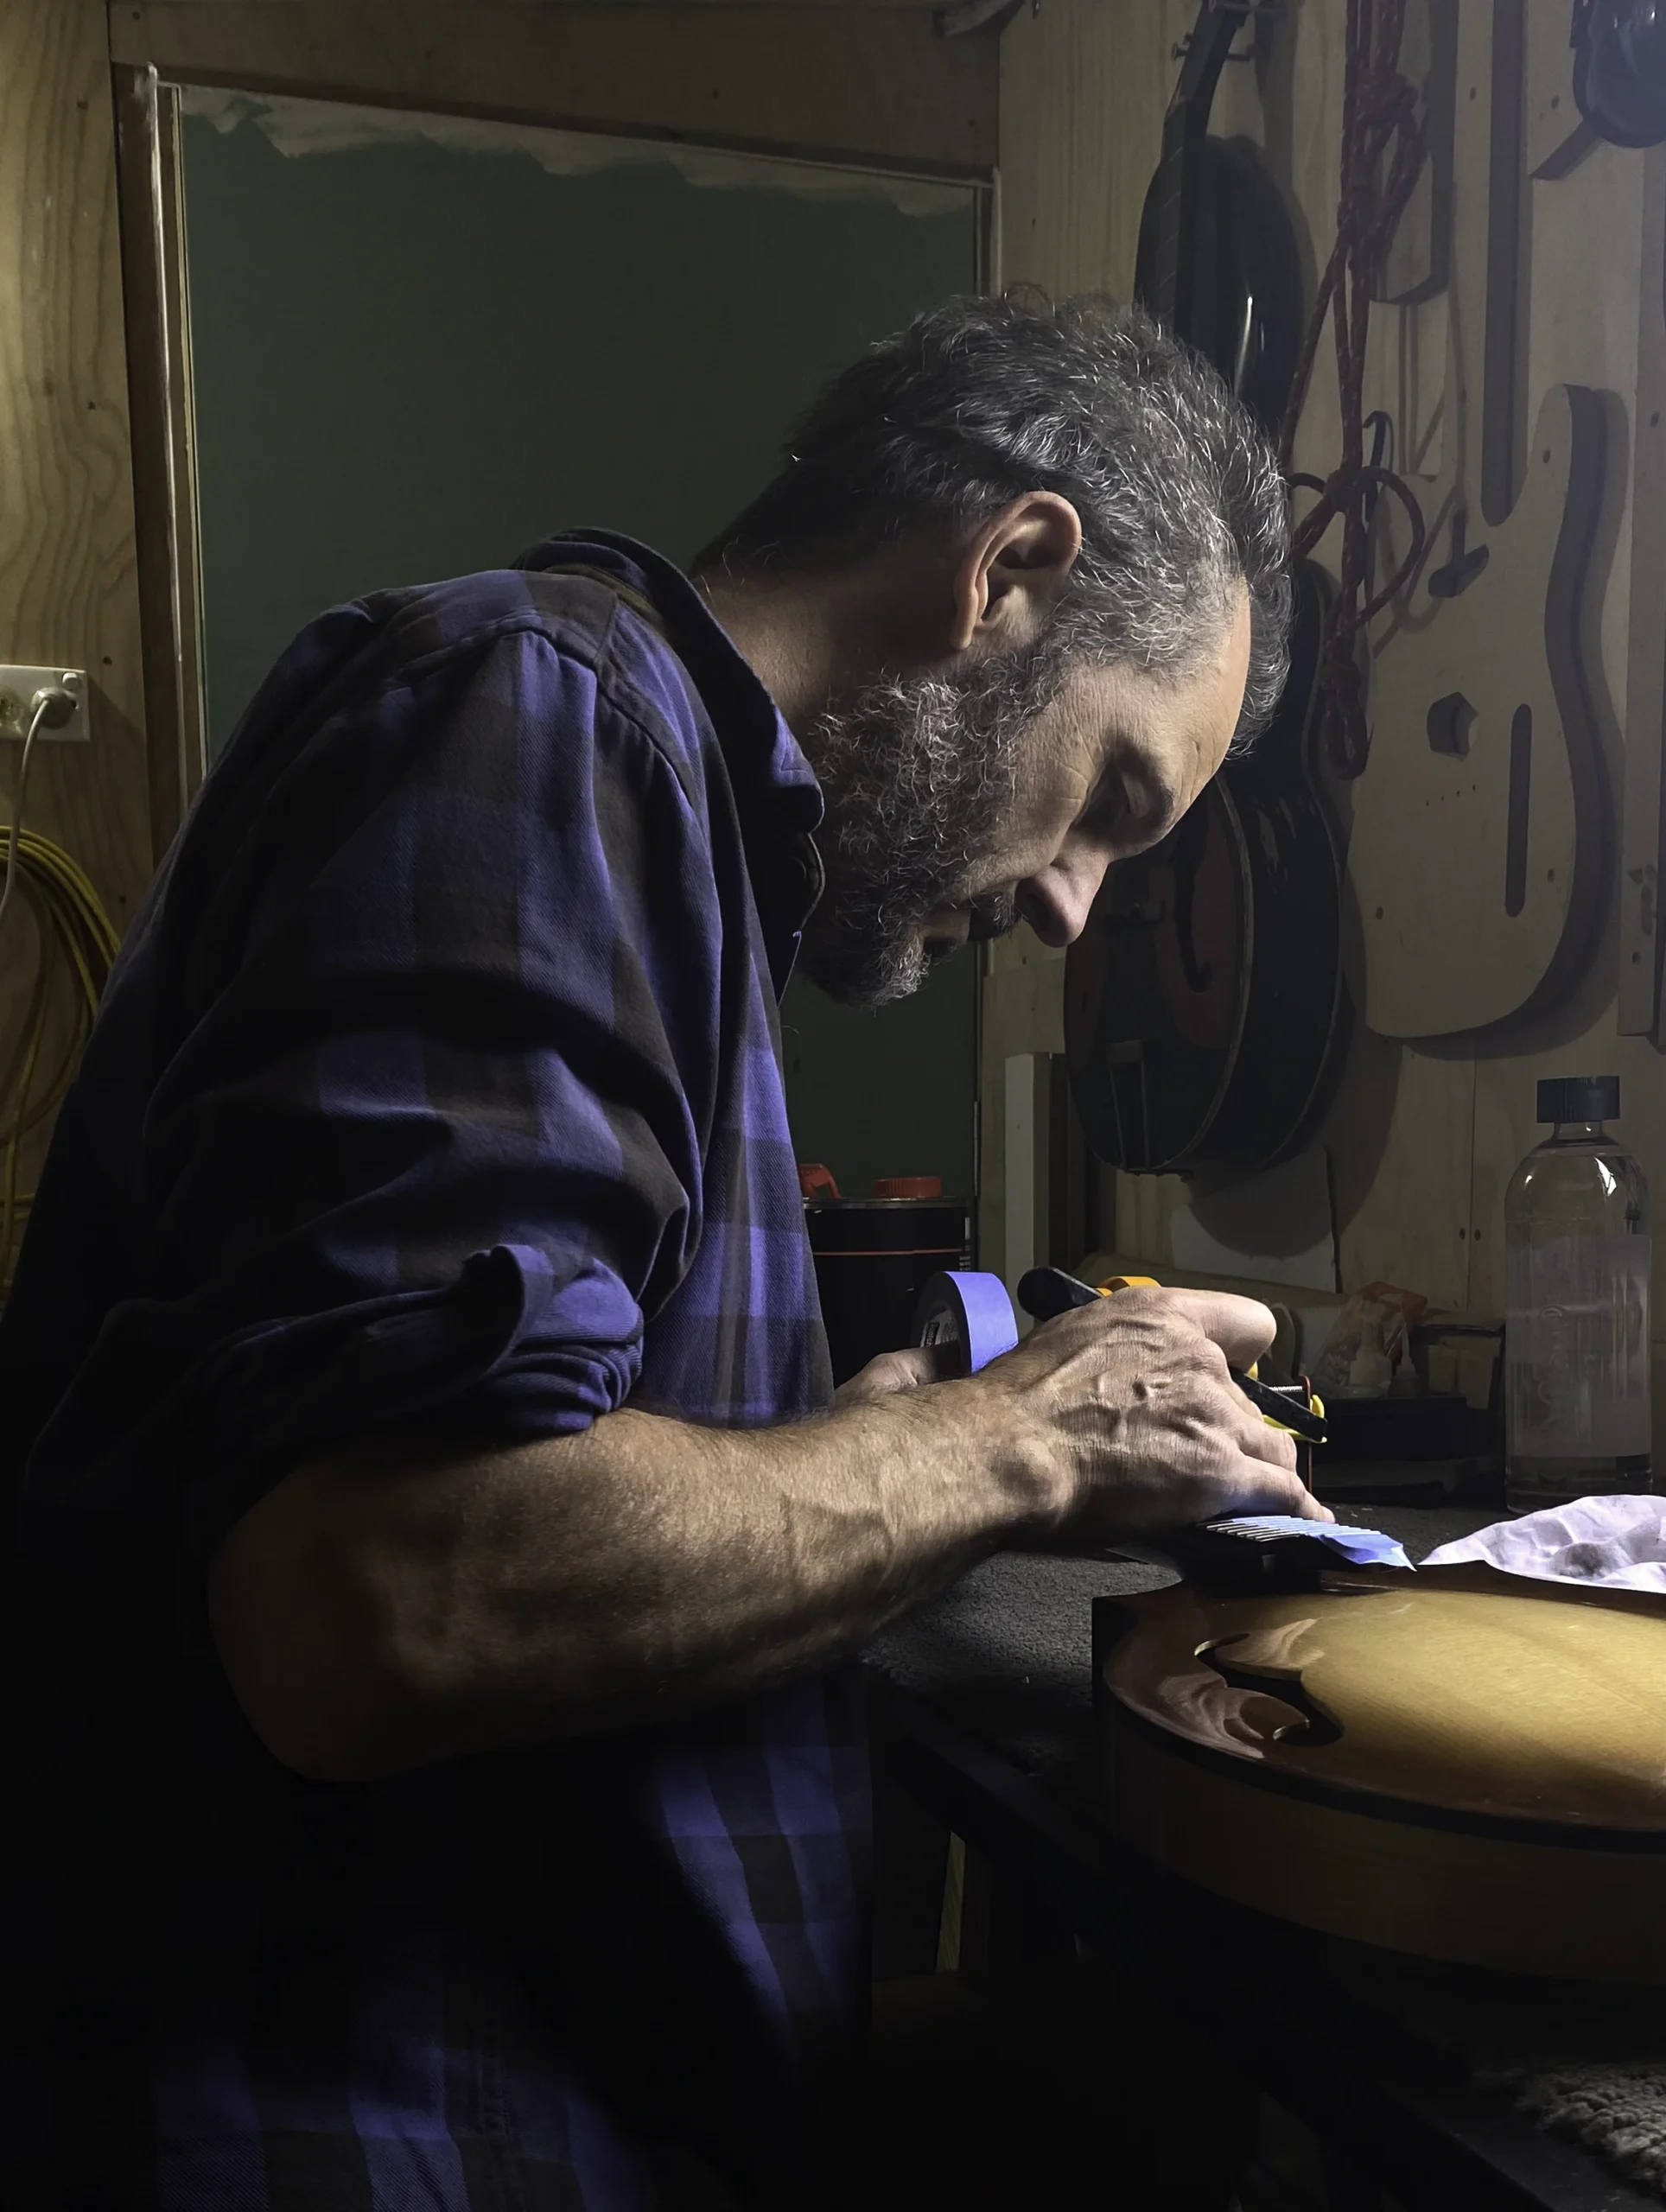 Lachlan Maclennan Luthier and maker in his studio working on a custom mandolin.